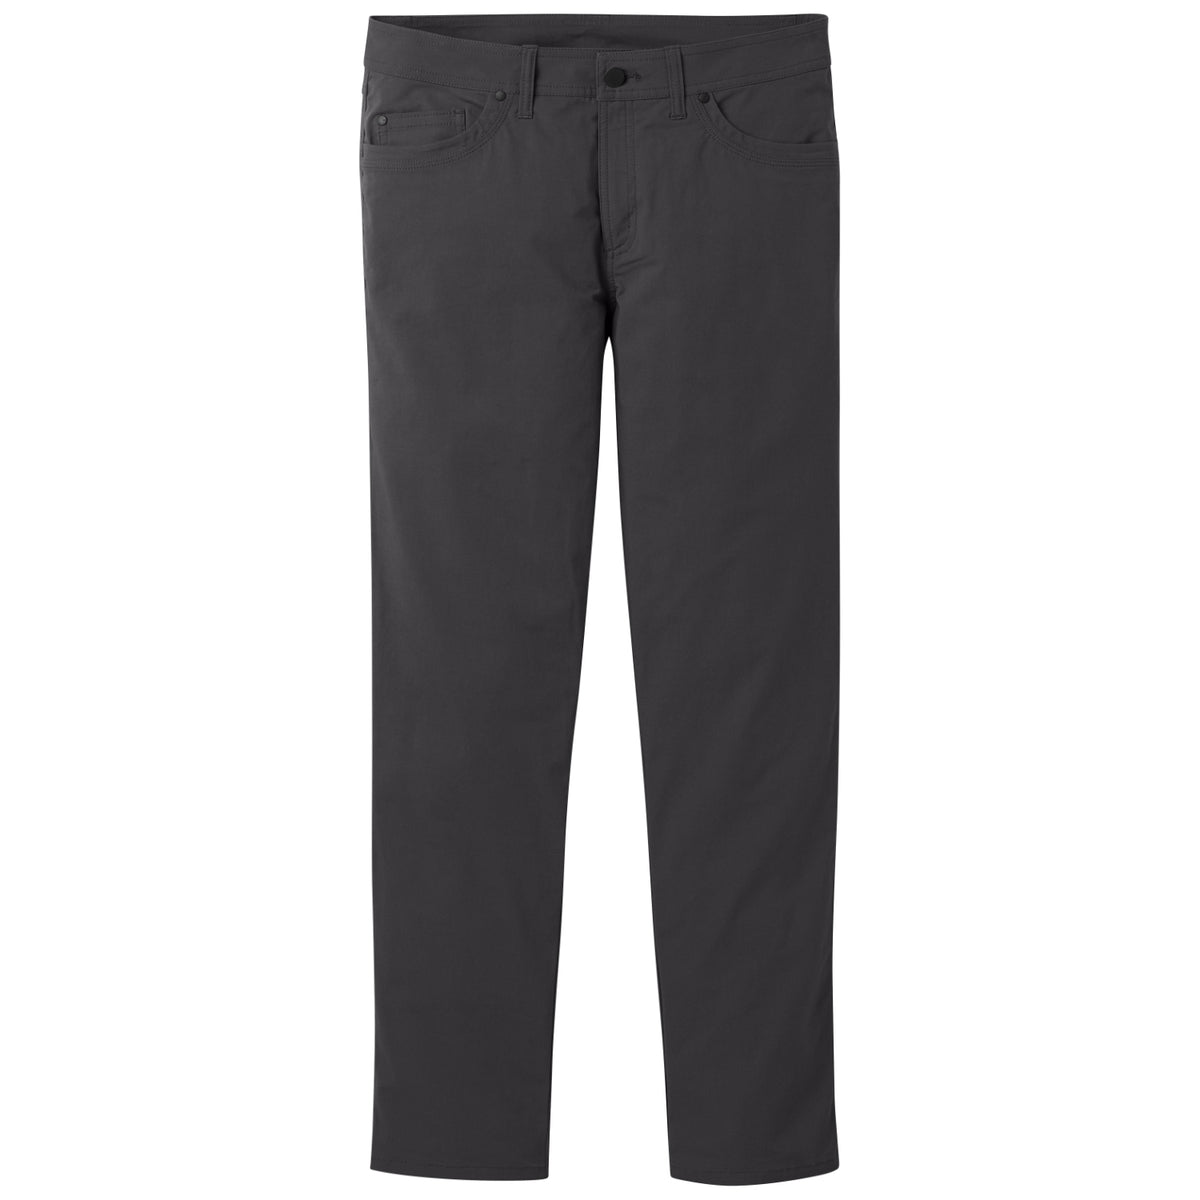 Outdoor Research Shastin Pant